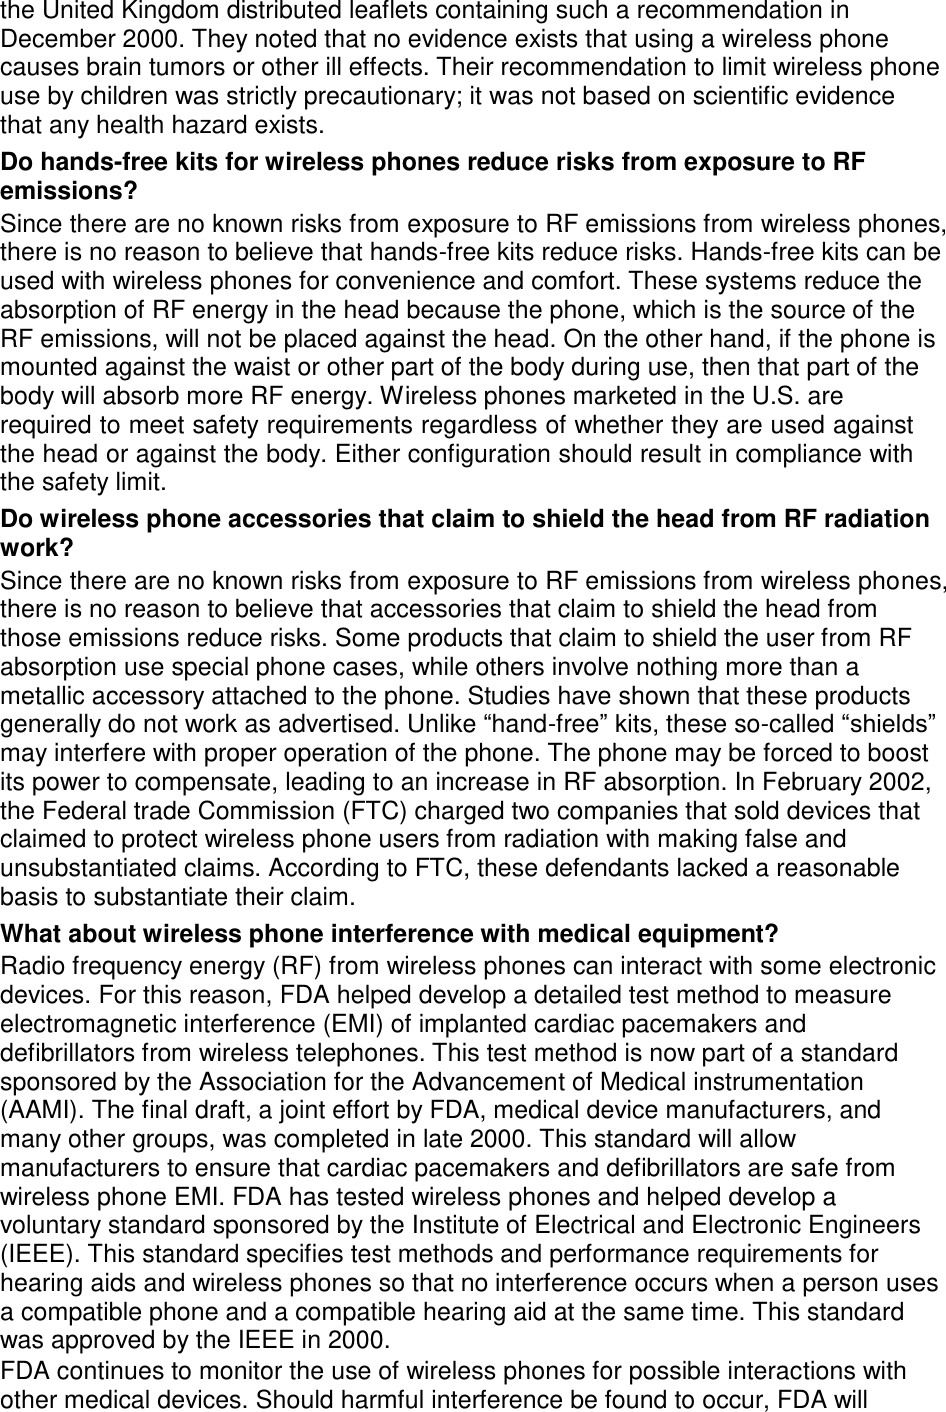  the United Kingdom distributed leaflets containing such a recommendation in December 2000. They noted that no evidence exists that using a wireless phone causes brain tumors or other ill effects. Their recommendation to limit wireless phone use by children was strictly precautionary; it was not based on scientific evidence that any health hazard exists. Do hands-free kits for wireless phones reduce risks from exposure to RF emissions? Since there are no known risks from exposure to RF emissions from wireless phones, there is no reason to believe that hands-free kits reduce risks. Hands-free kits can be used with wireless phones for convenience and comfort. These systems reduce the absorption of RF energy in the head because the phone, which is the source of the RF emissions, will not be placed against the head. On the other hand, if the phone is mounted against the waist or other part of the body during use, then that part of the body will absorb more RF energy. Wireless phones marketed in the U.S. are required to meet safety requirements regardless of whether they are used against the head or against the body. Either configuration should result in compliance with the safety limit. Do wireless phone accessories that claim to shield the head from RF radiation work? Since there are no known risks from exposure to RF emissions from wireless phones, there is no reason to believe that accessories that claim to shield the head from those emissions reduce risks. Some products that claim to shield the user from RF absorption use special phone cases, while others involve nothing more than a metallic accessory attached to the phone. Studies have shown that these products generally do not work as advertised. Unlike “hand-free” kits, these so-called “shields” may interfere with proper operation of the phone. The phone may be forced to boost its power to compensate, leading to an increase in RF absorption. In February 2002, the Federal trade Commission (FTC) charged two companies that sold devices that claimed to protect wireless phone users from radiation with making false and unsubstantiated claims. According to FTC, these defendants lacked a reasonable basis to substantiate their claim. What about wireless phone interference with medical equipment? Radio frequency energy (RF) from wireless phones can interact with some electronic devices. For this reason, FDA helped develop a detailed test method to measure electromagnetic interference (EMI) of implanted cardiac pacemakers and defibrillators from wireless telephones. This test method is now part of a standard sponsored by the Association for the Advancement of Medical instrumentation (AAMI). The final draft, a joint effort by FDA, medical device manufacturers, and many other groups, was completed in late 2000. This standard will allow manufacturers to ensure that cardiac pacemakers and defibrillators are safe from wireless phone EMI. FDA has tested wireless phones and helped develop a voluntary standard sponsored by the Institute of Electrical and Electronic Engineers (IEEE). This standard specifies test methods and performance requirements for hearing aids and wireless phones so that no interference occurs when a person uses a compatible phone and a compatible hearing aid at the same time. This standard was approved by the IEEE in 2000. FDA continues to monitor the use of wireless phones for possible interactions with other medical devices. Should harmful interference be found to occur, FDA will 